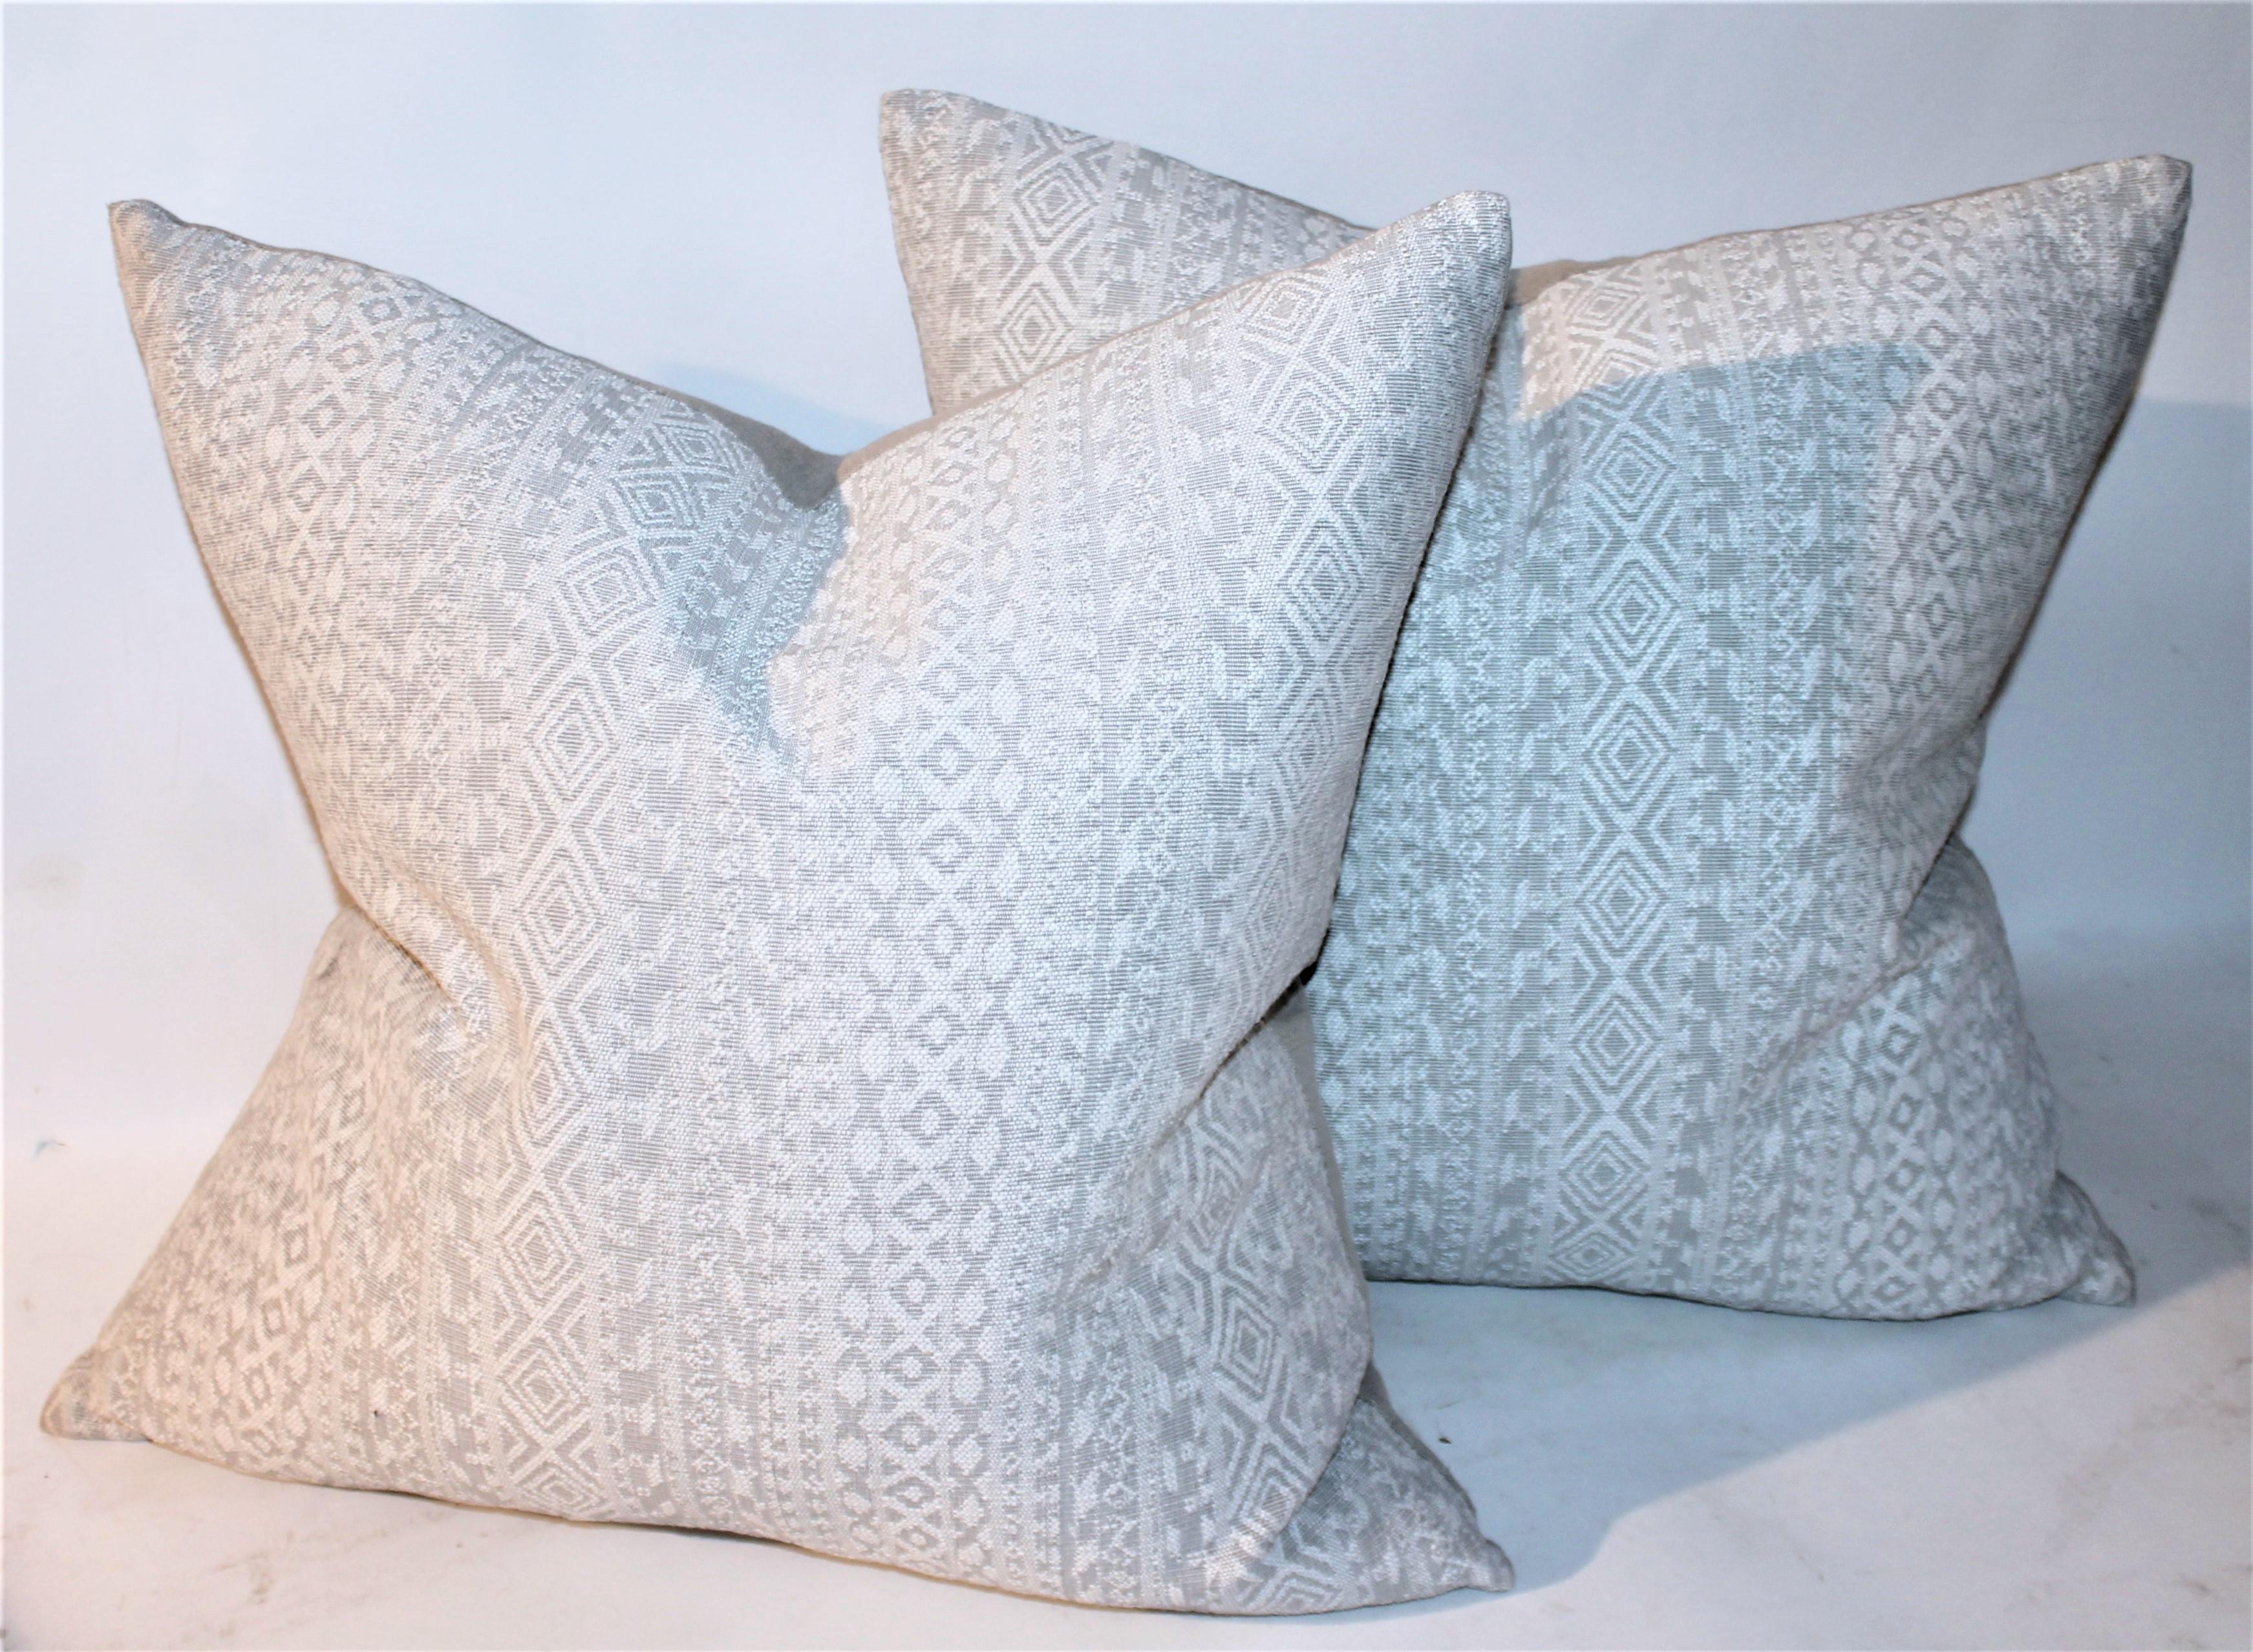 Set of 4 beautiful white and gray geometric pillows with linen back. New inserts.
Great for a bedroom or livingroom.